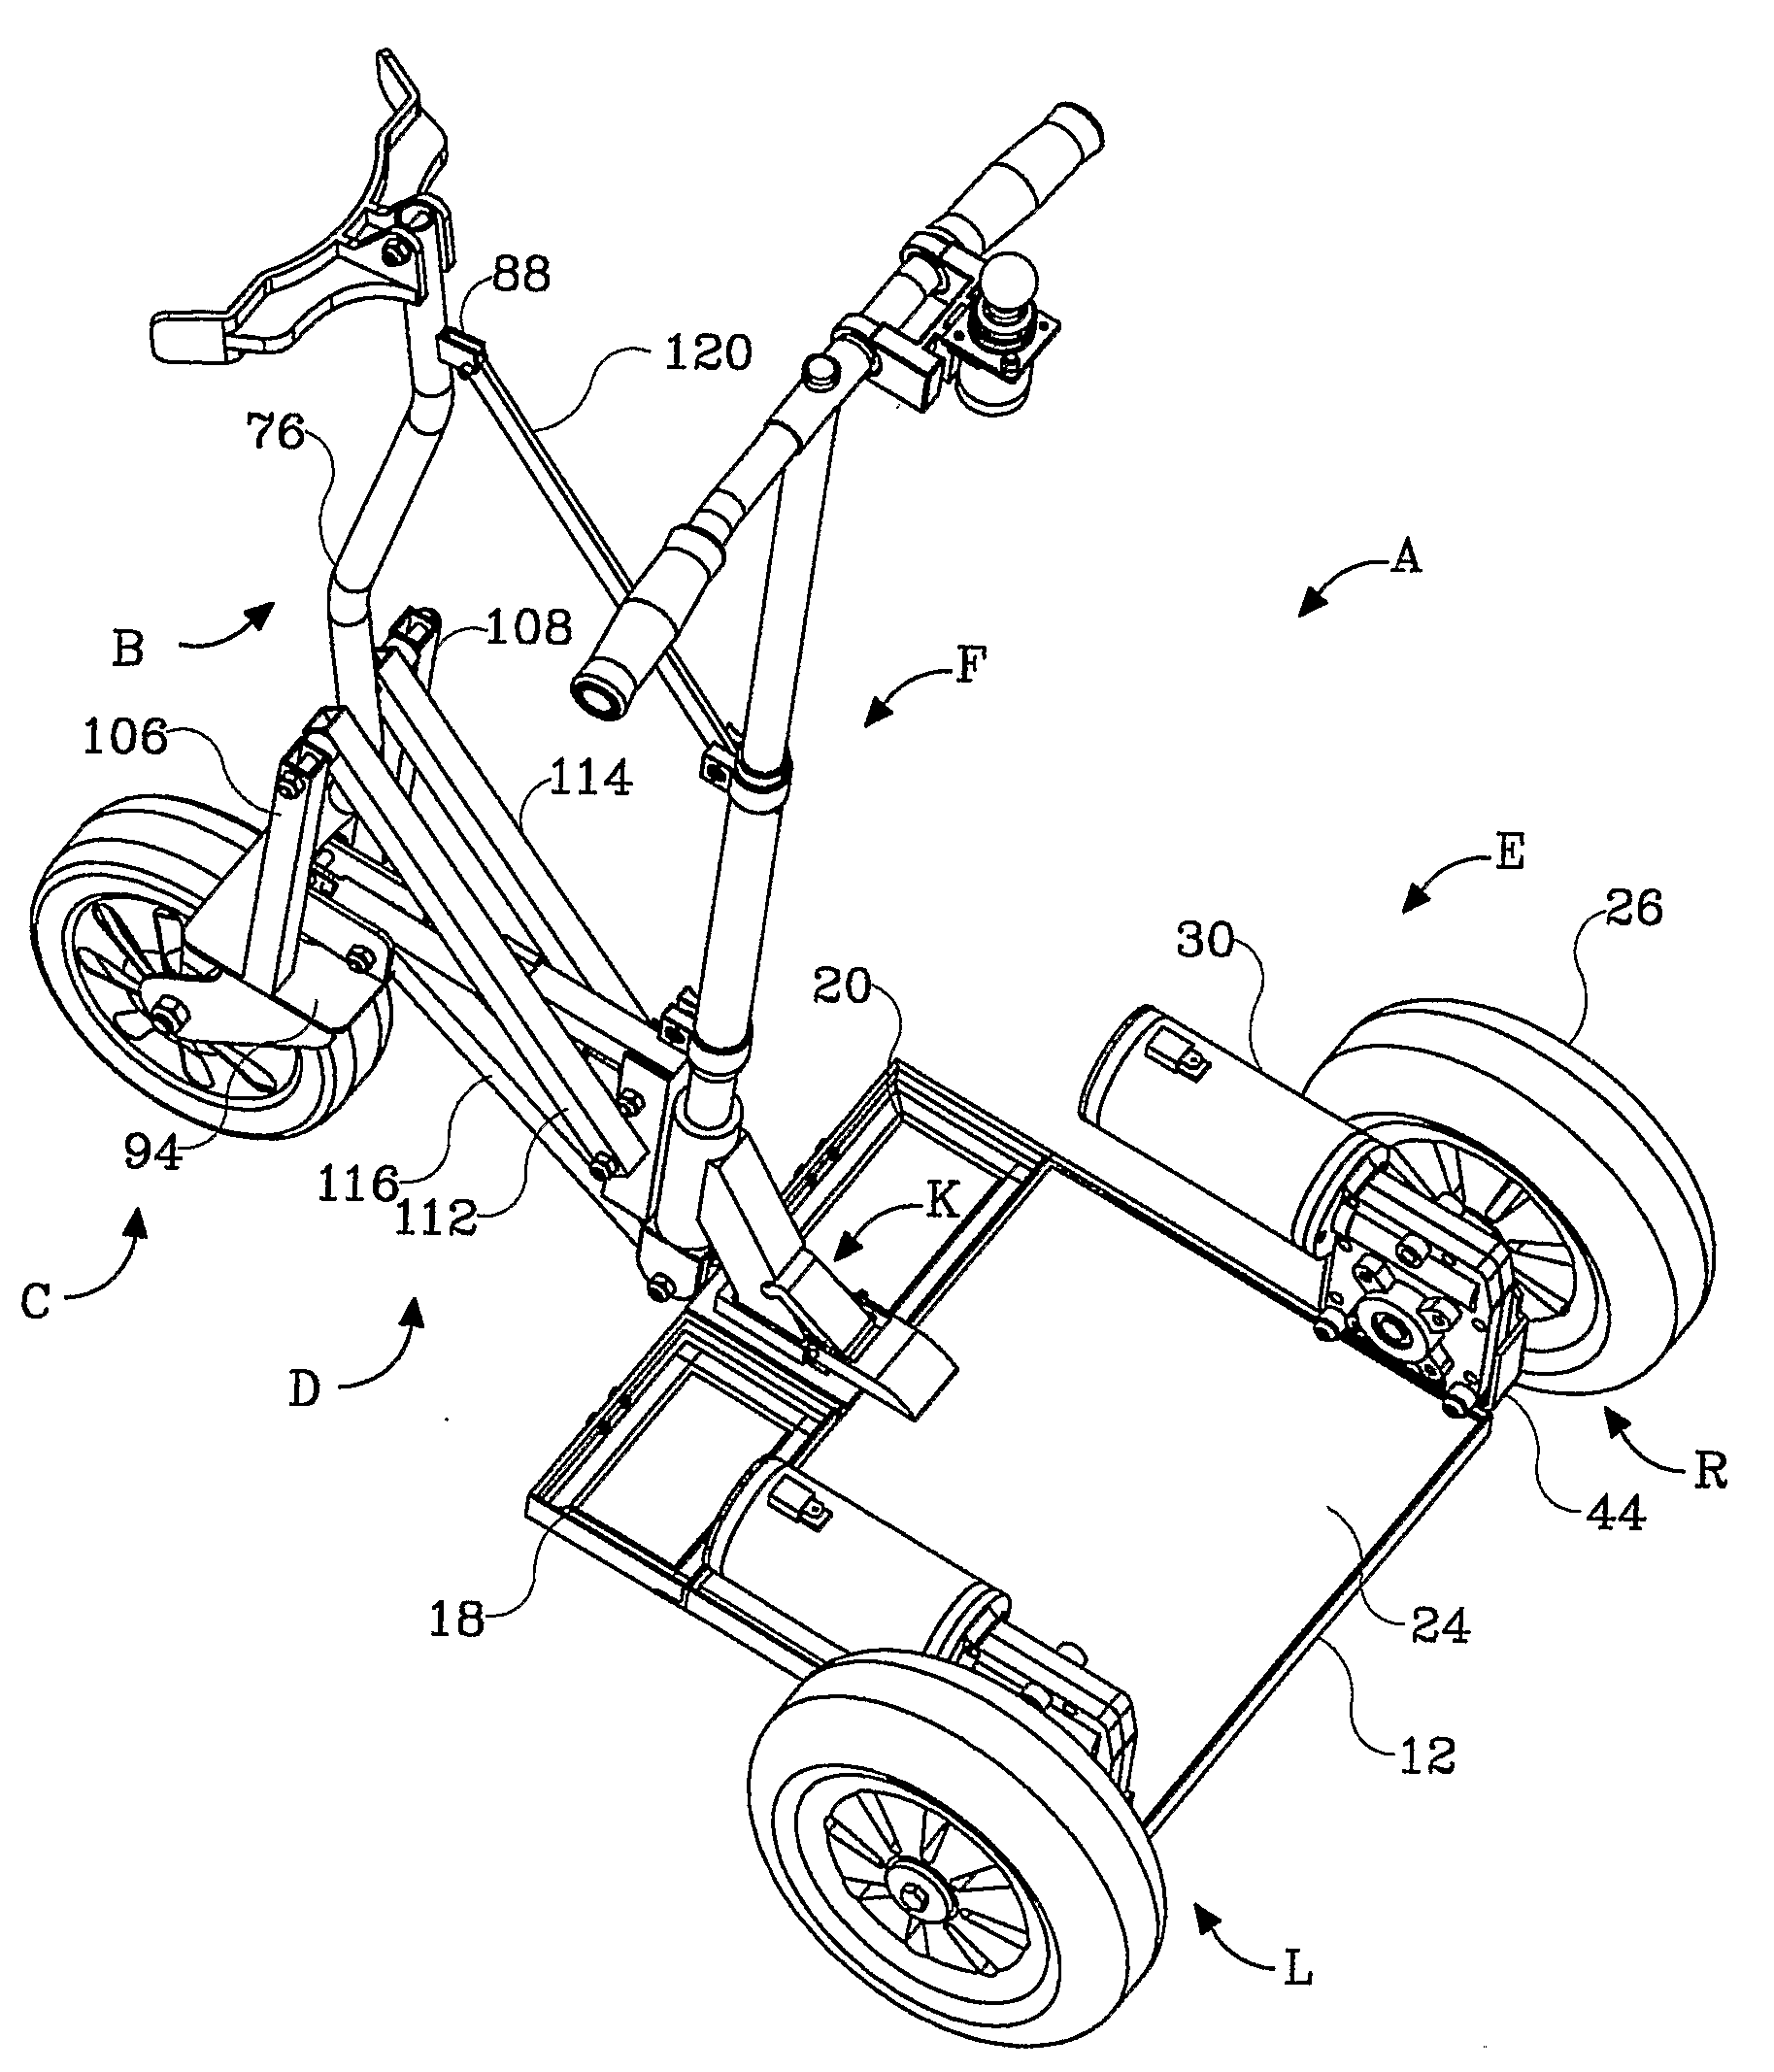 Self-Powered Vehicle With Selectable Operational Modes